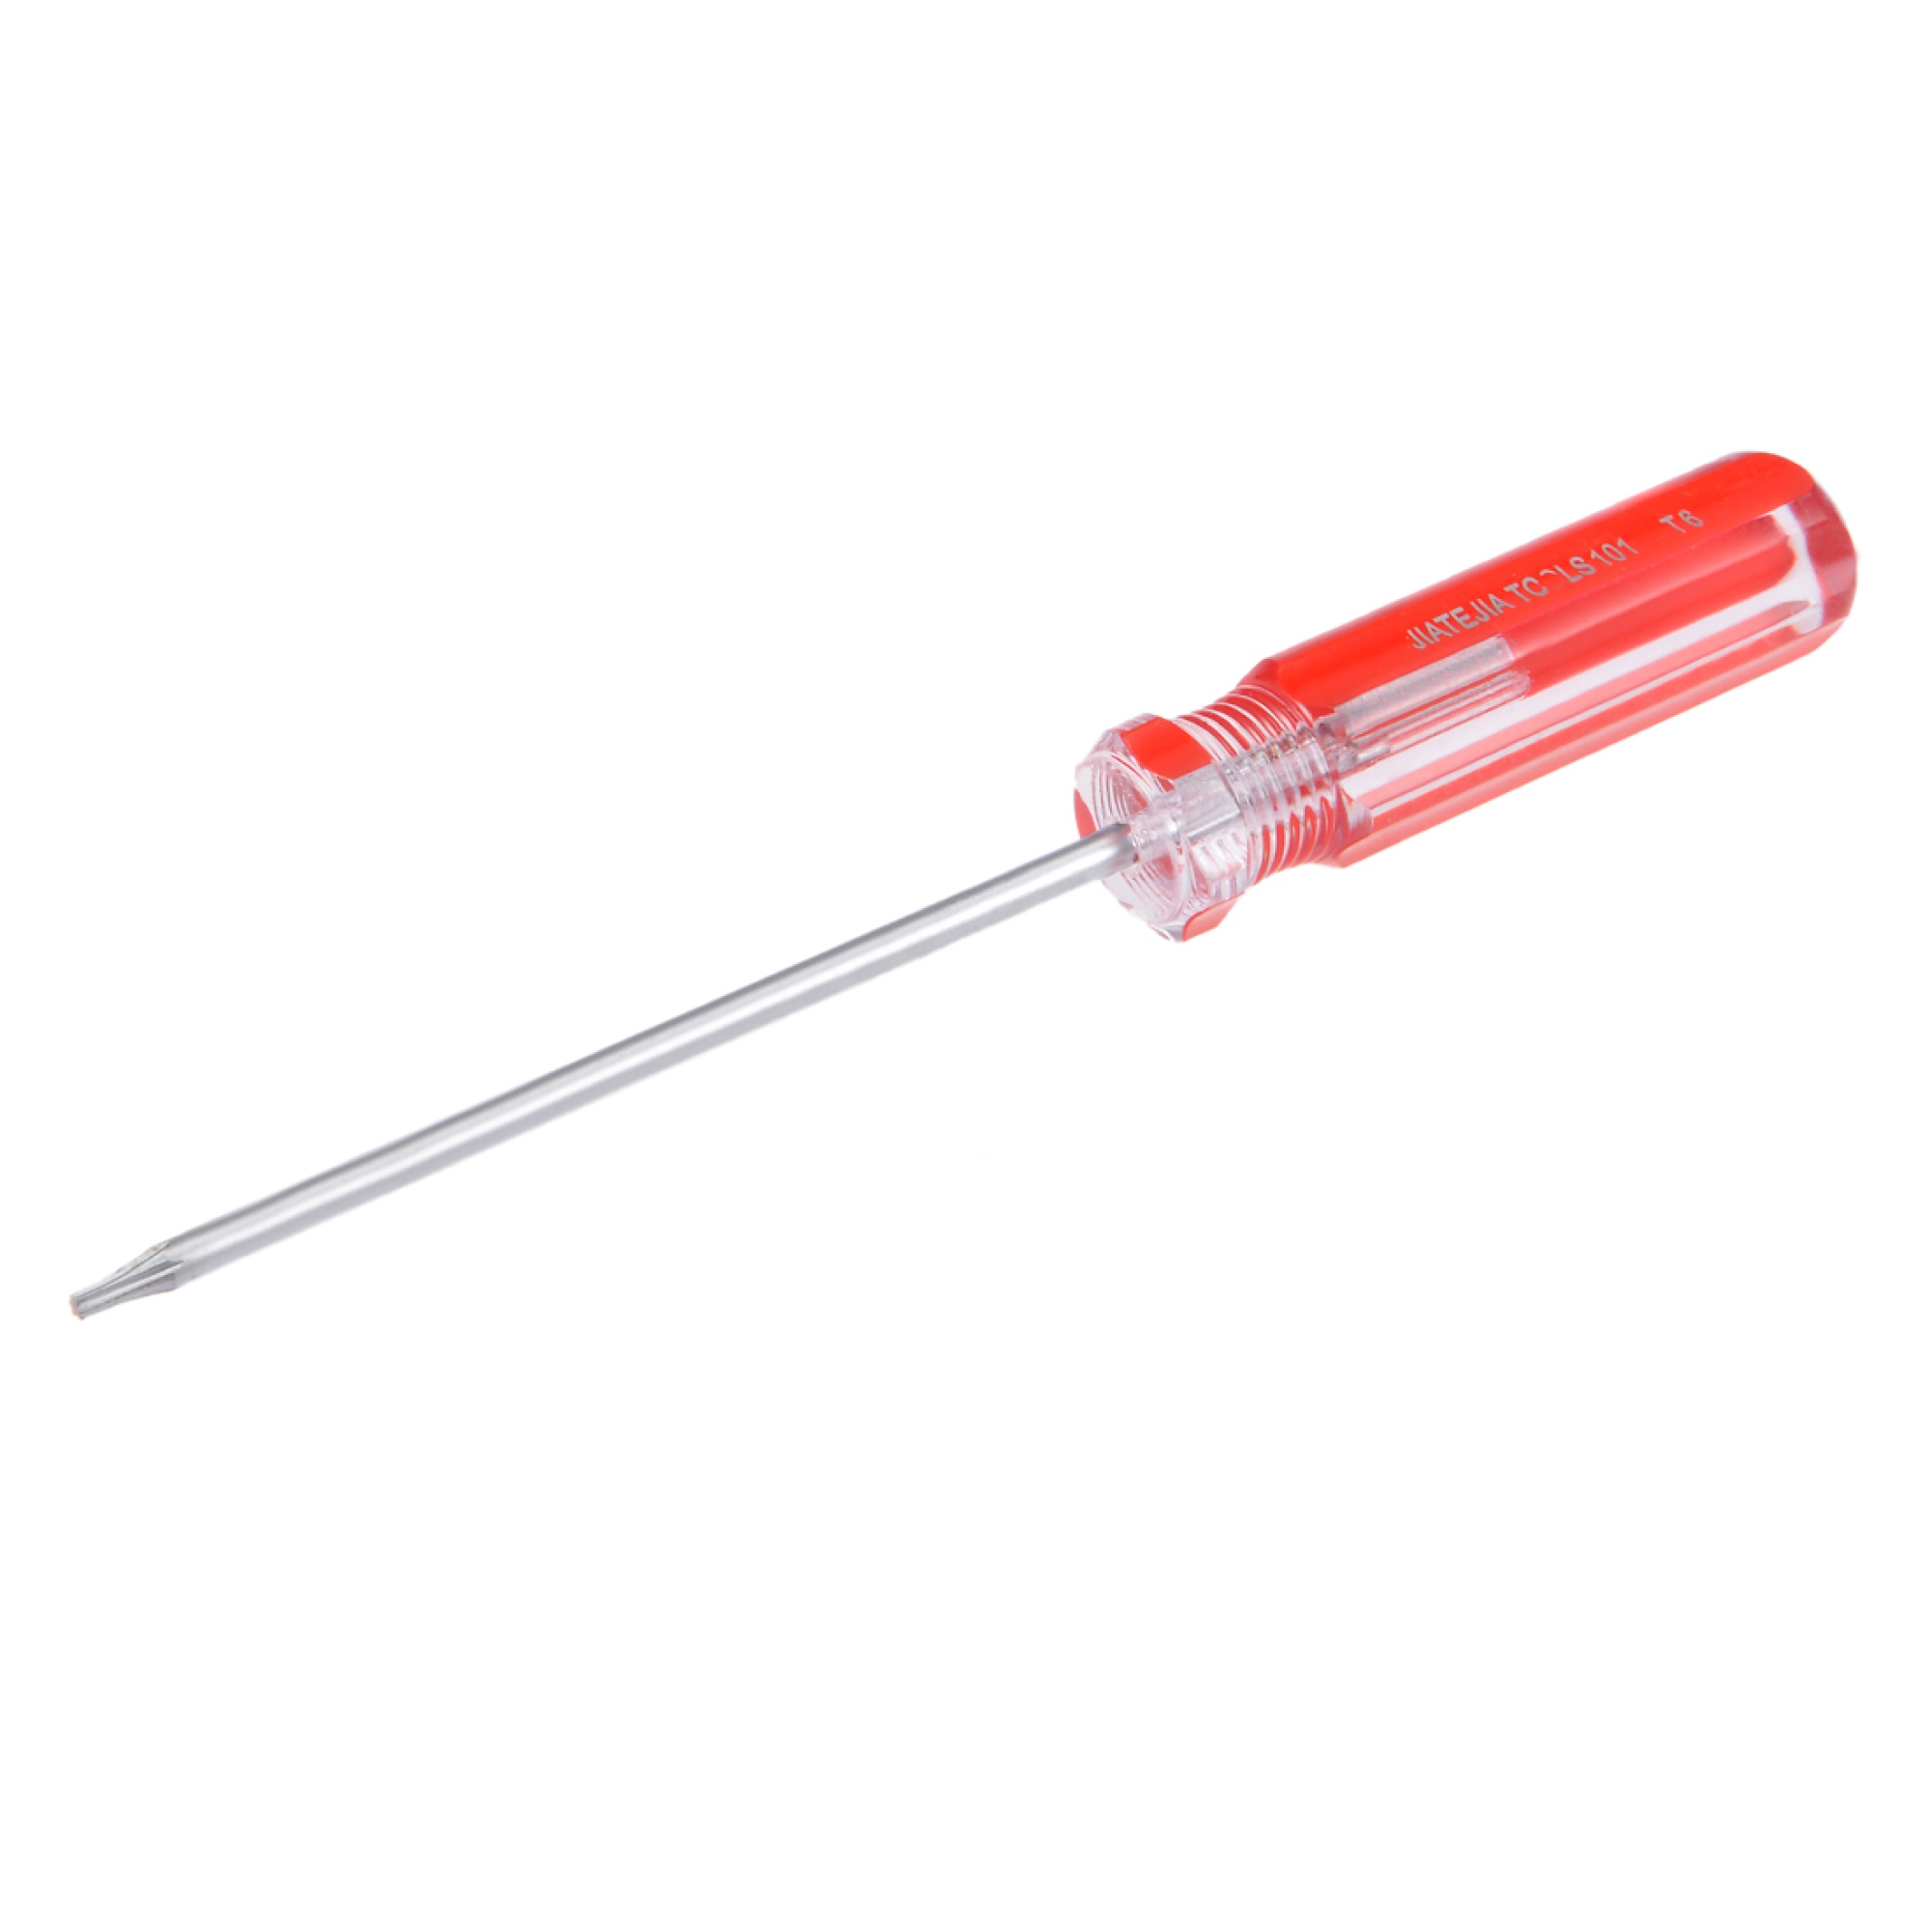 Torx Screwdriver T6 Magnetic Star Screw Driver with 3" Shaft